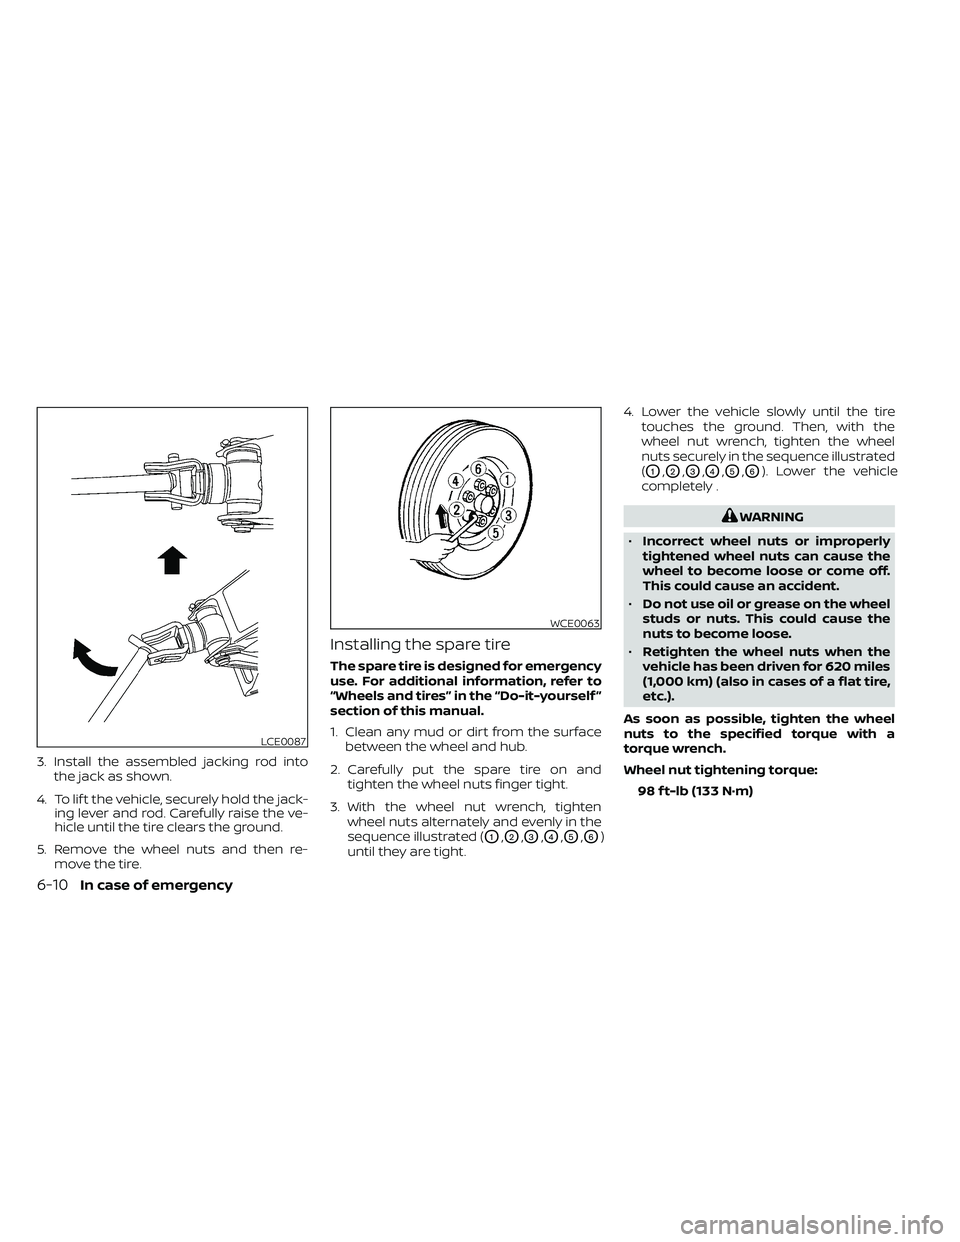 NISSAN FRONTIER 2020  Owner´s Manual 3. Install the assembled jacking rod intothe jack as shown.
4. To lif t the vehicle, securely hold the jack- ing lever and rod. Carefully raise the ve-
hicle until the tire clears the ground.
5. Remov